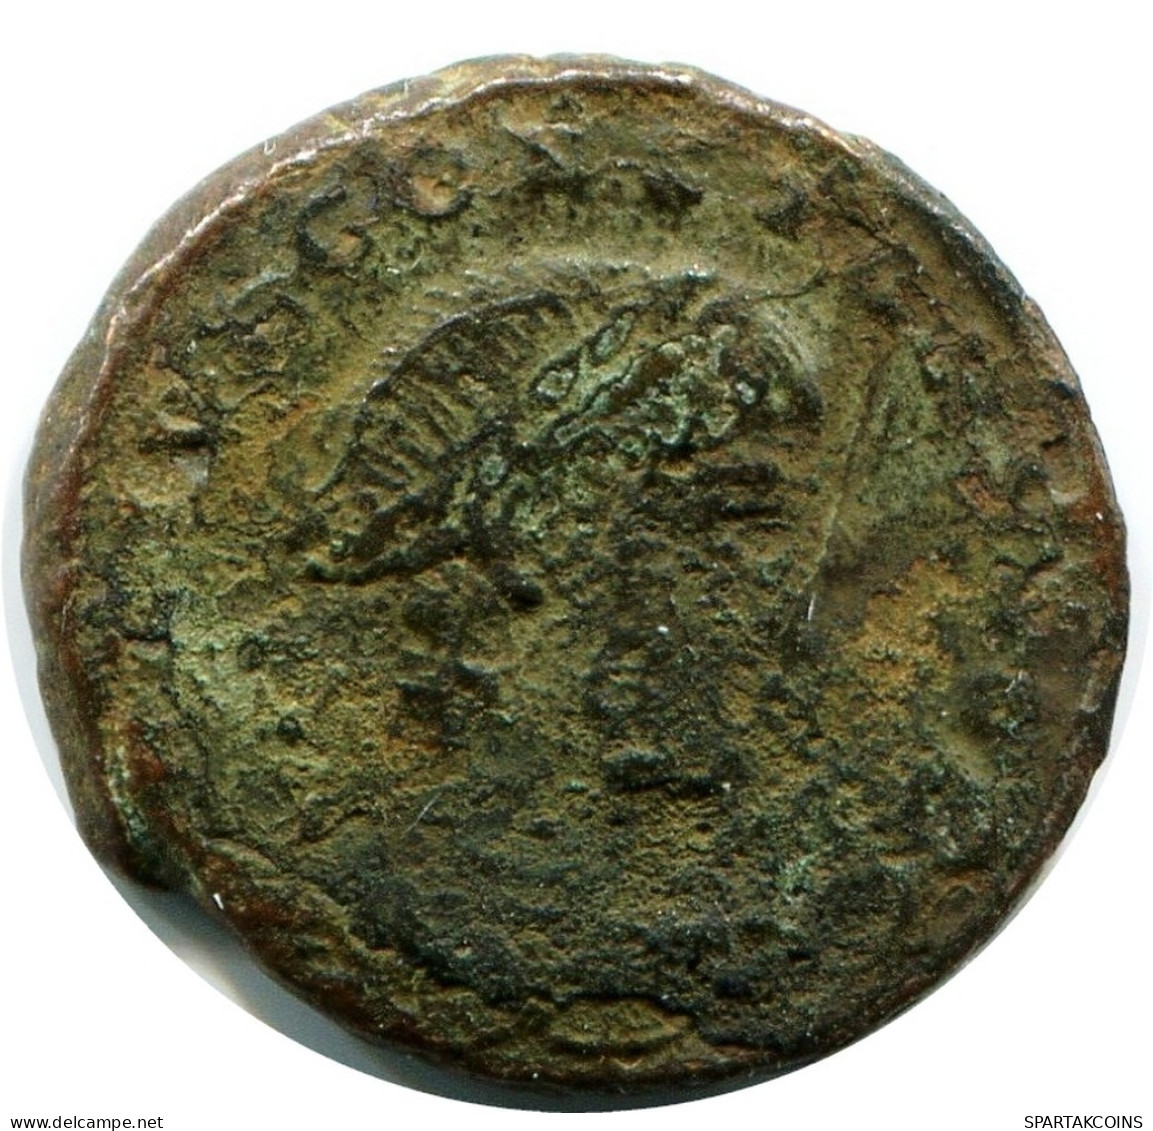 CONSTANS MINTED IN ANTIOCH FOUND IN IHNASYAH HOARD EGYPT #ANC11833.14.U.A - L'Empire Chrétien (307 à 363)